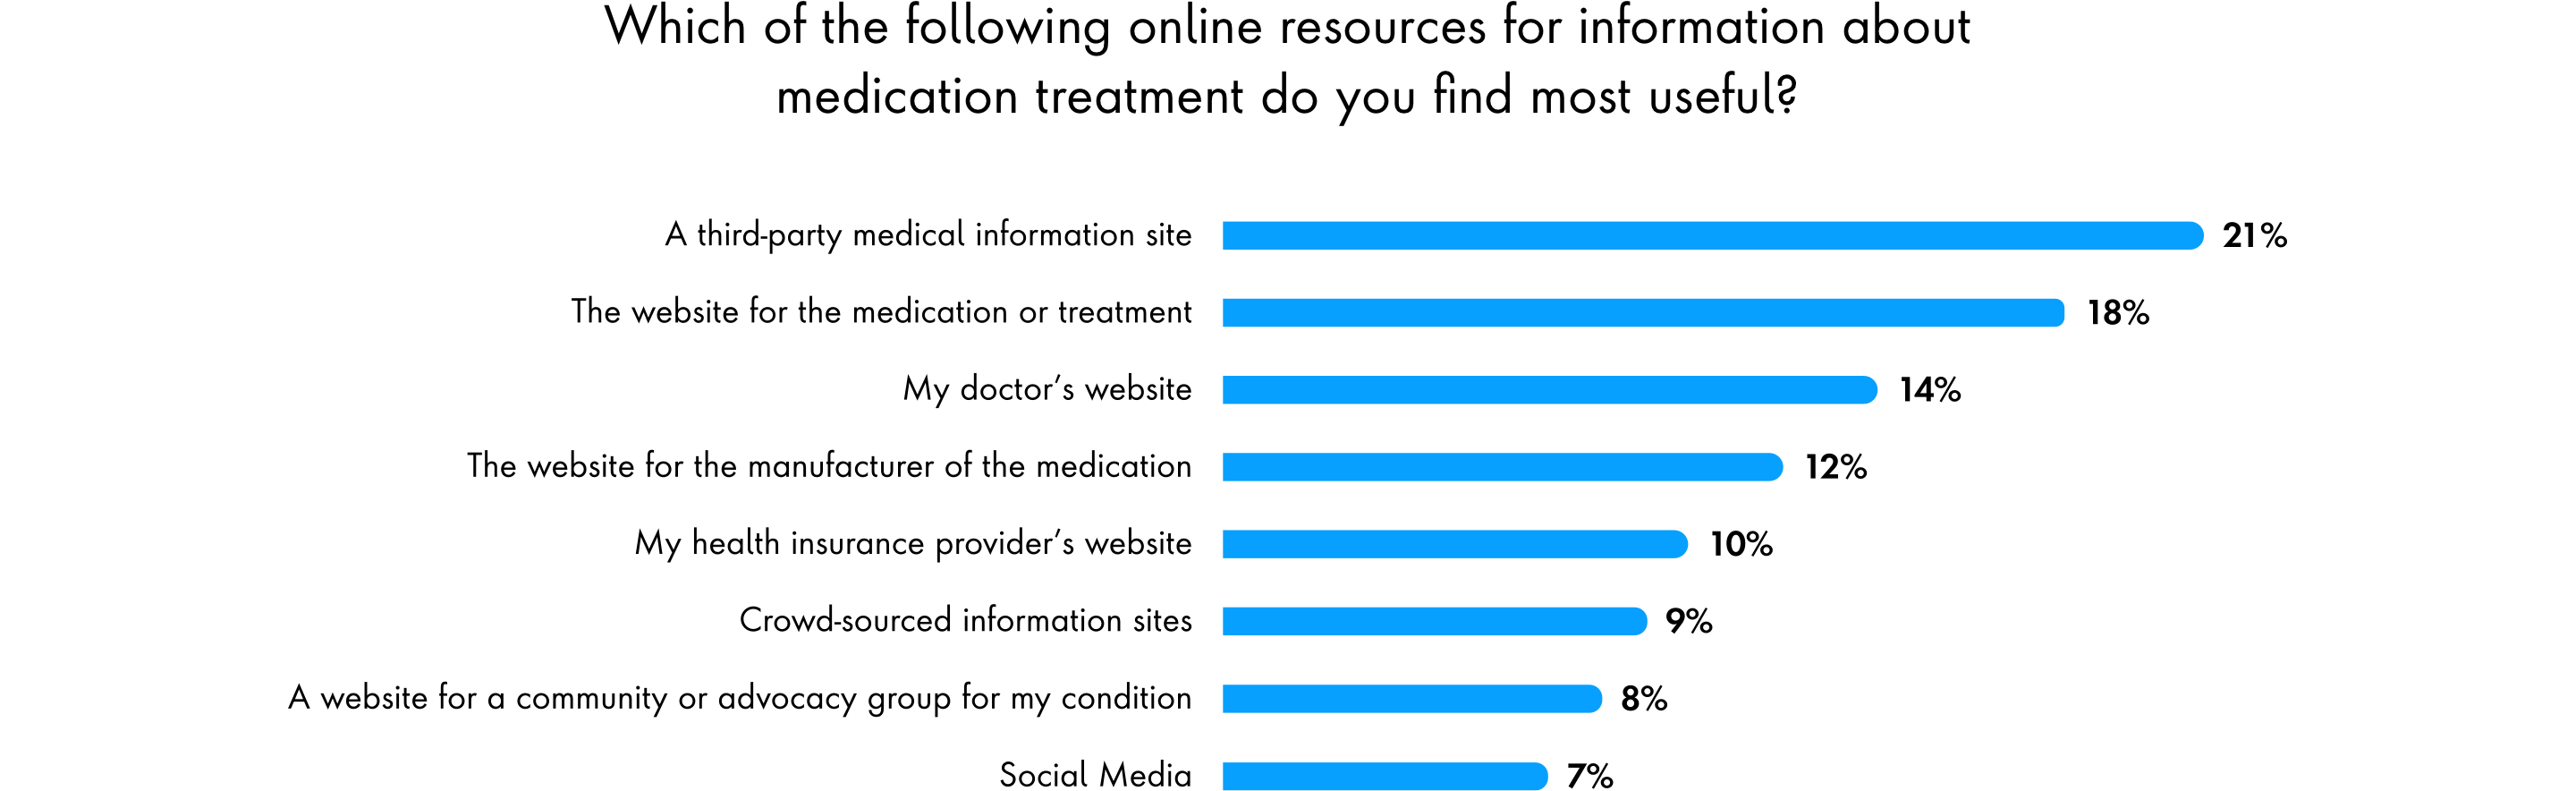 Which of the following resources for information about medication treatment do you find most useful?